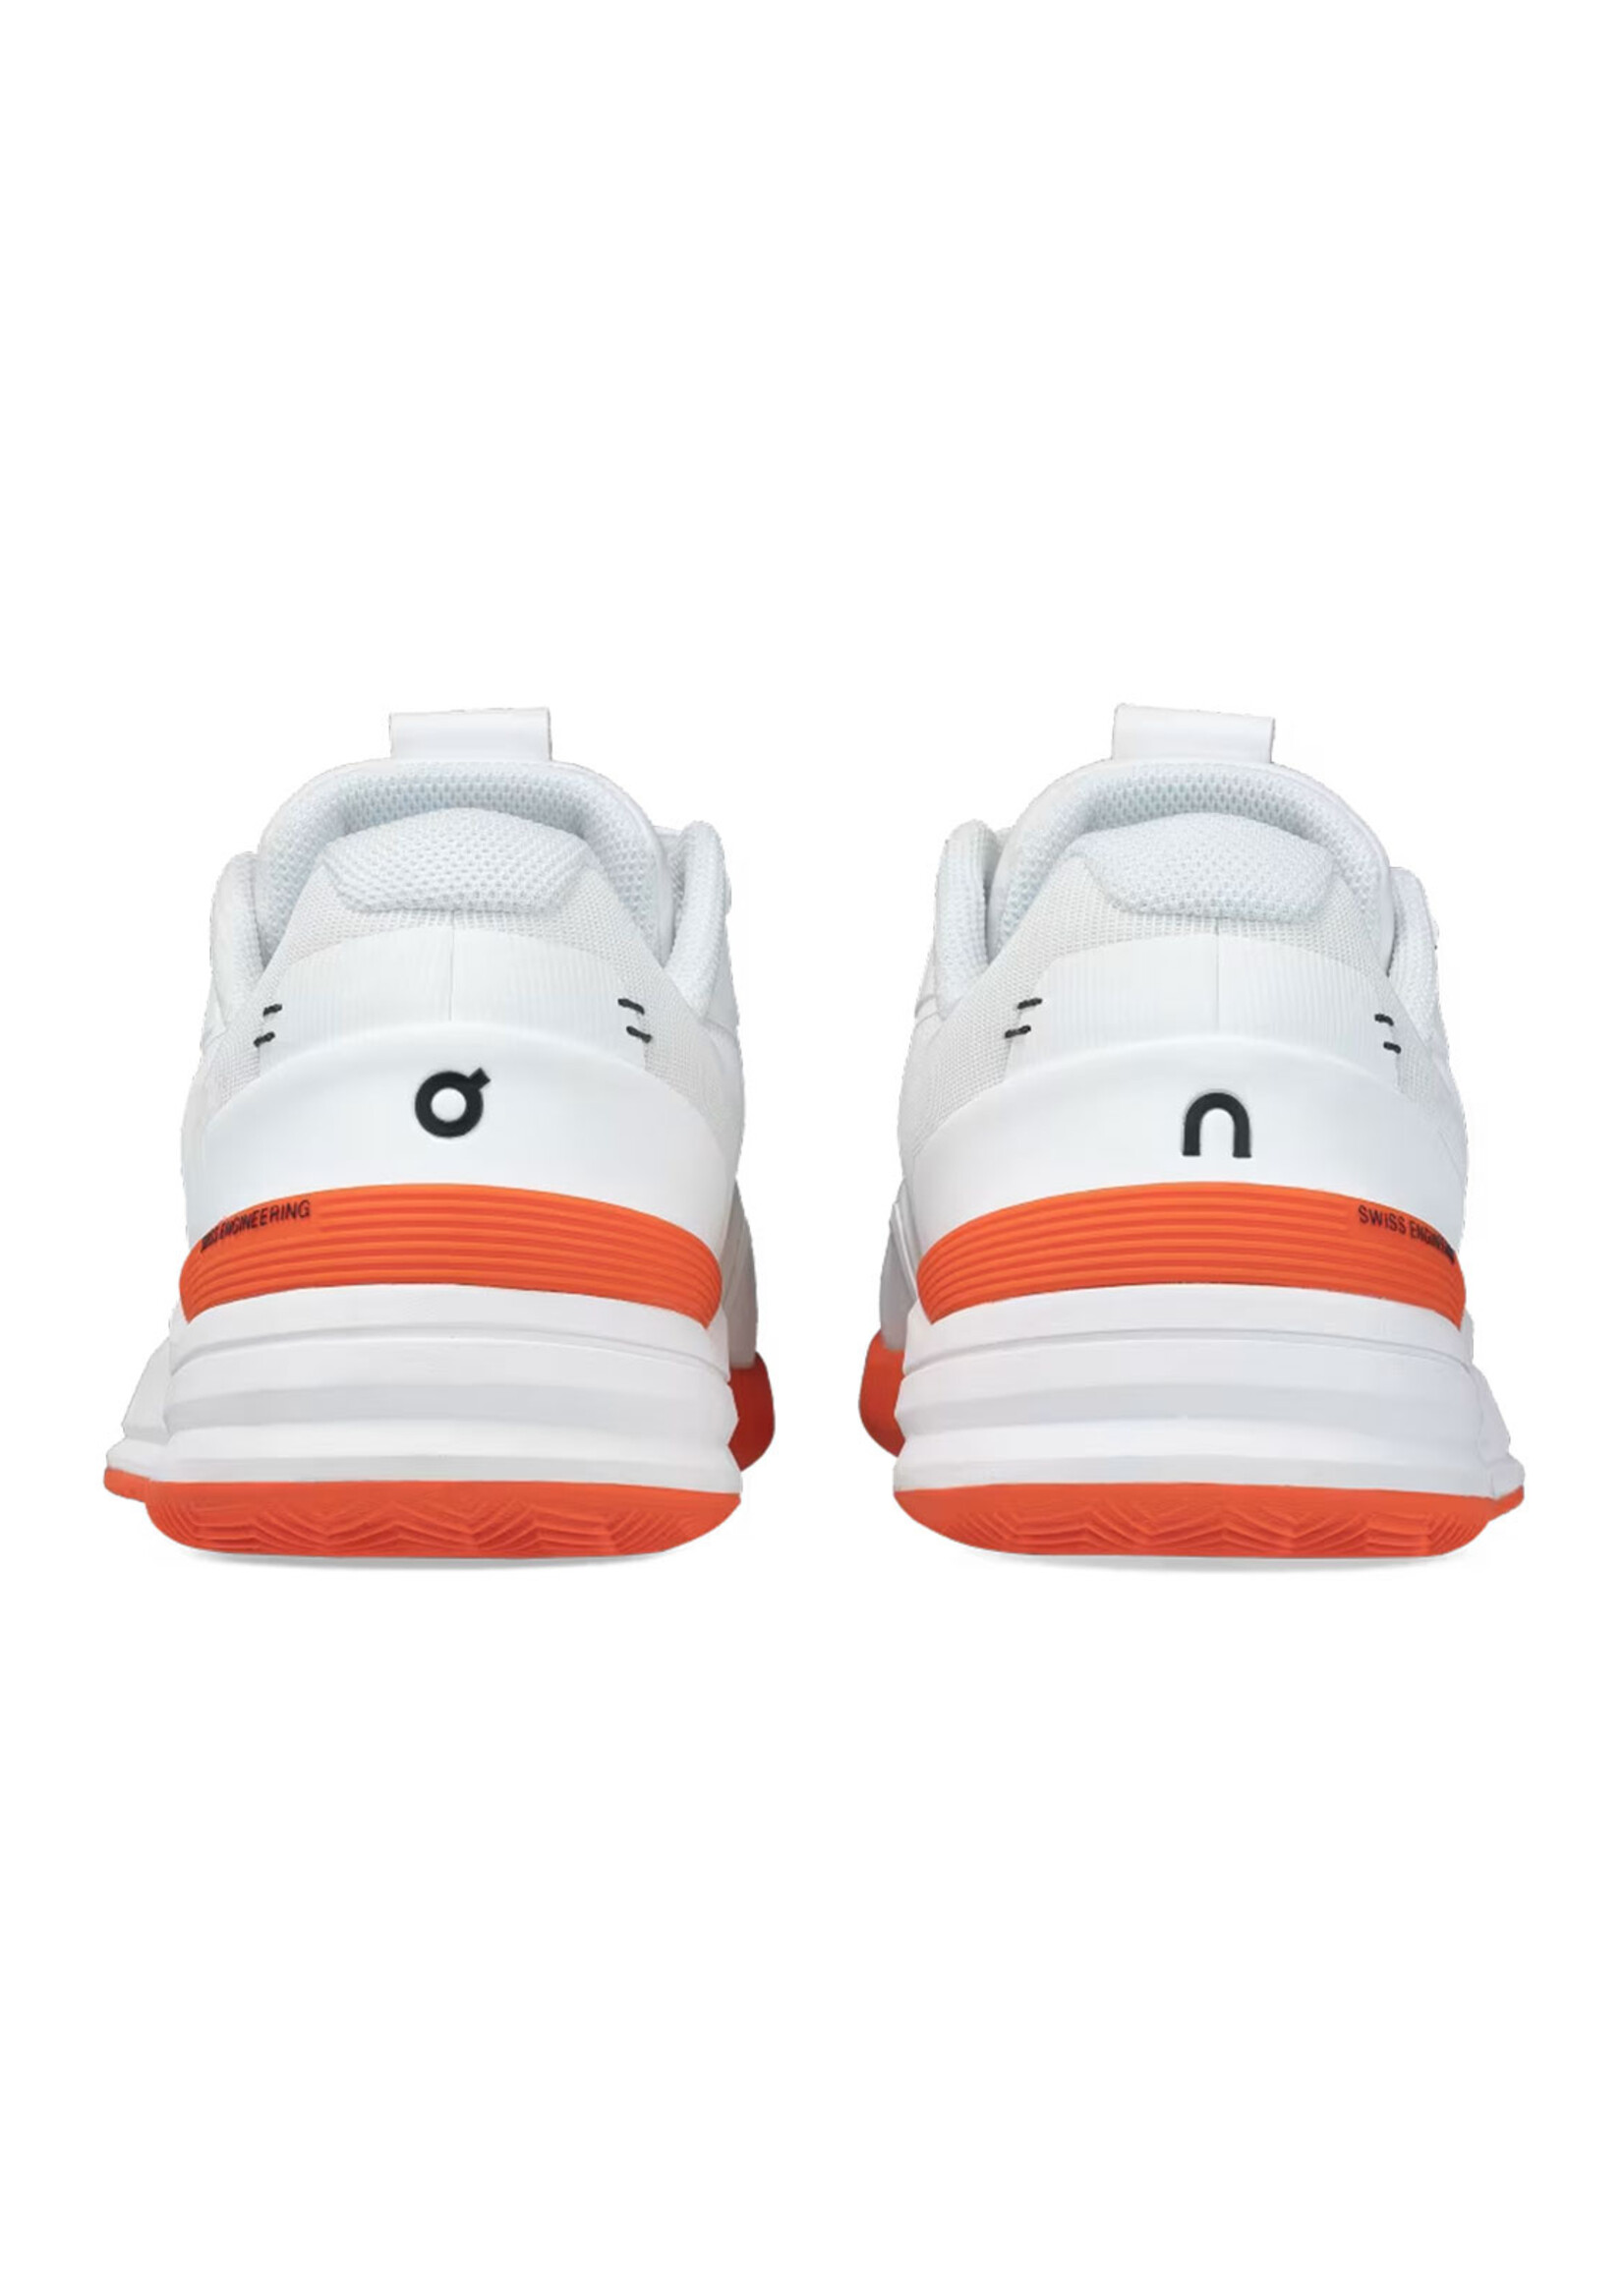 ON On The Roger Pro Clay Men's Tennis Shoes